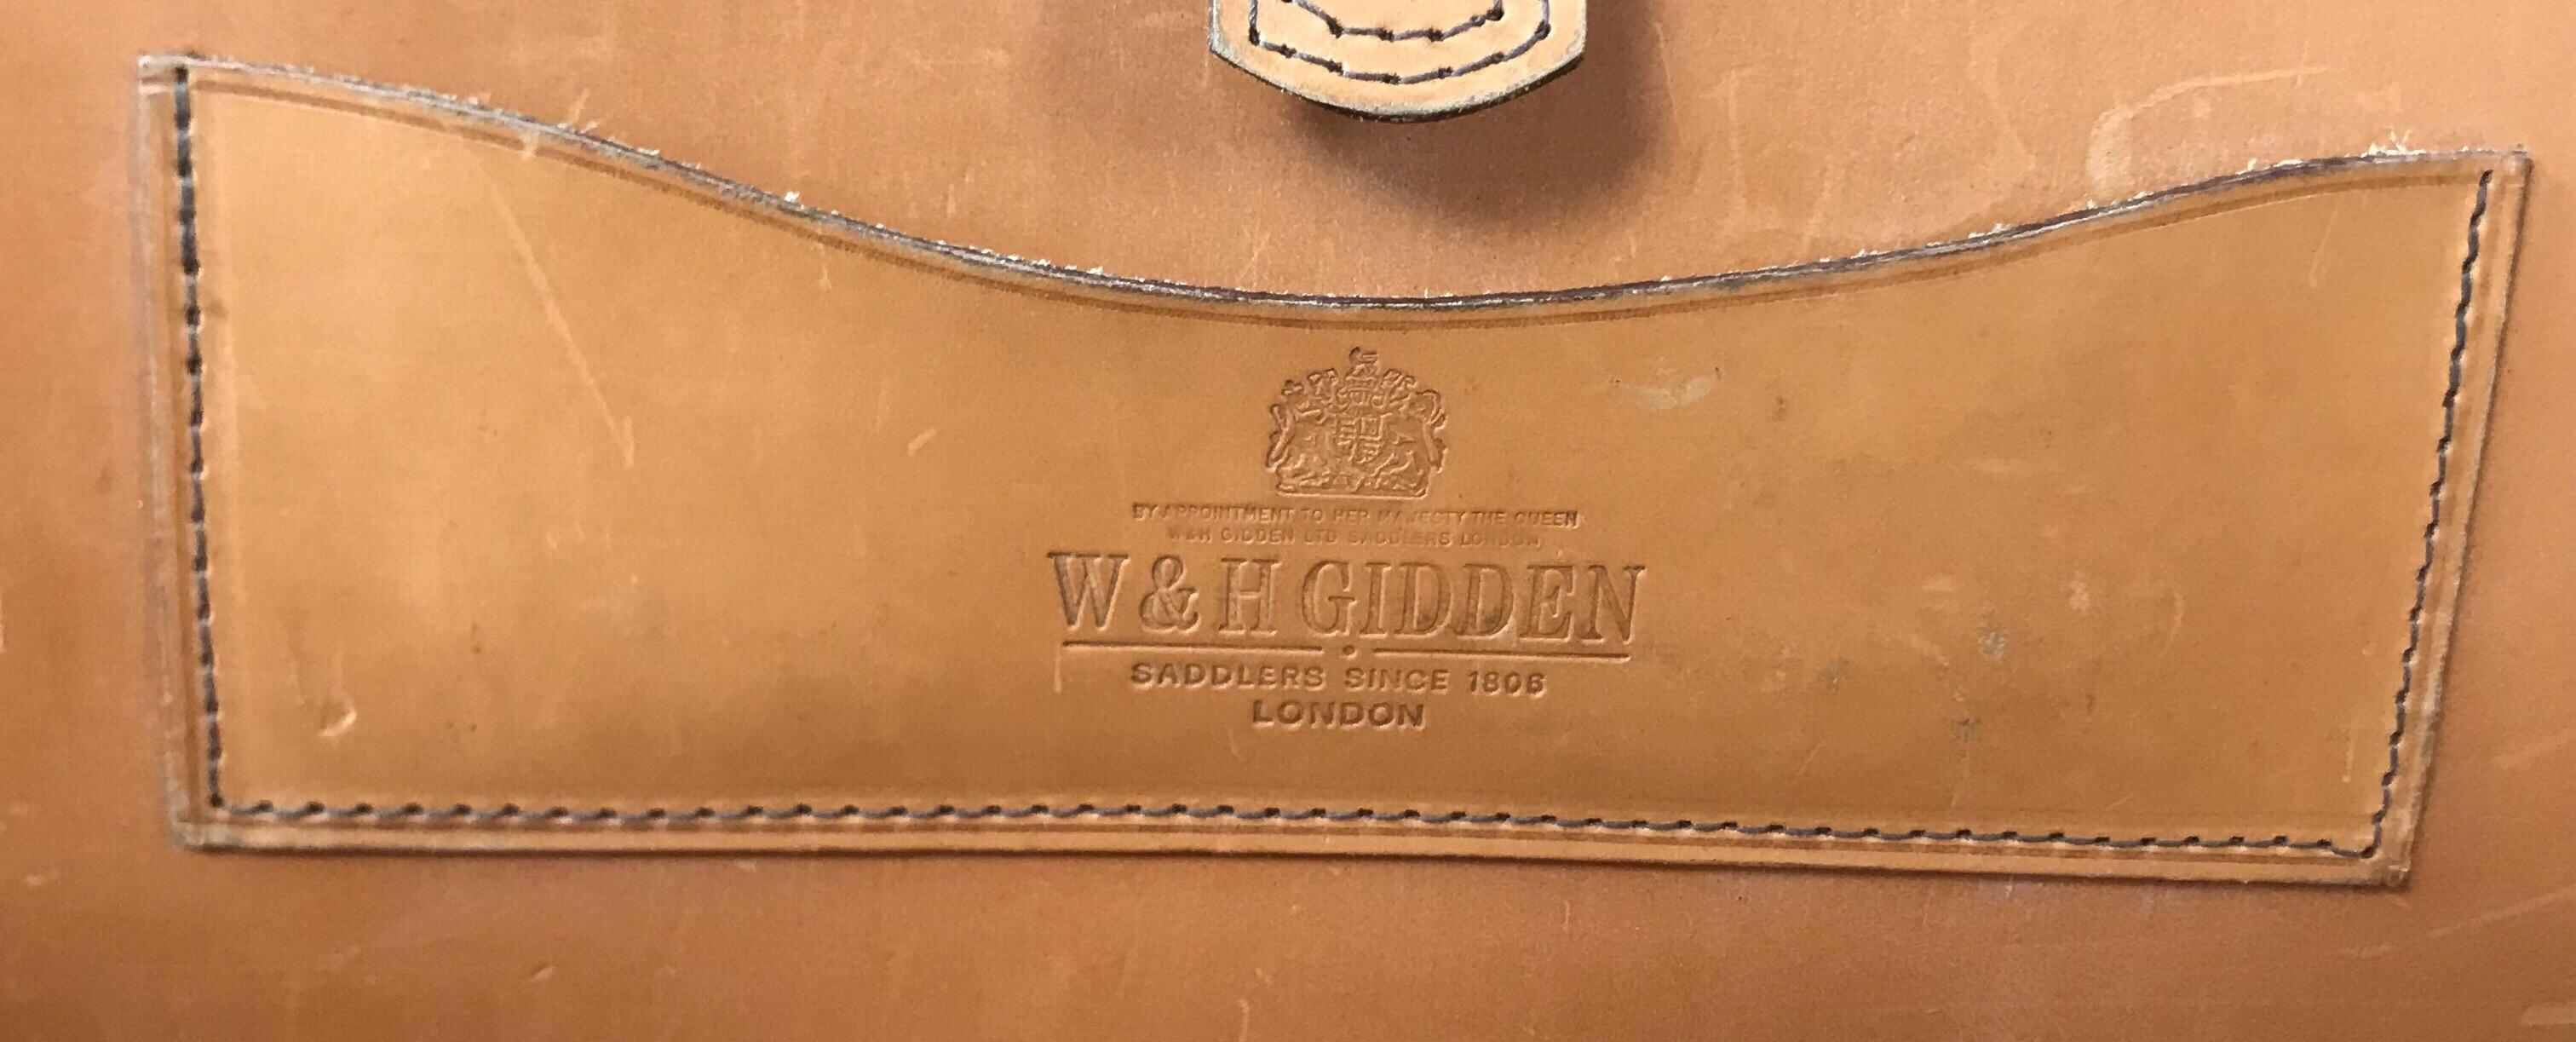 1960-1970 Hide Leather Attaché Case by “W & H Gidden” 7